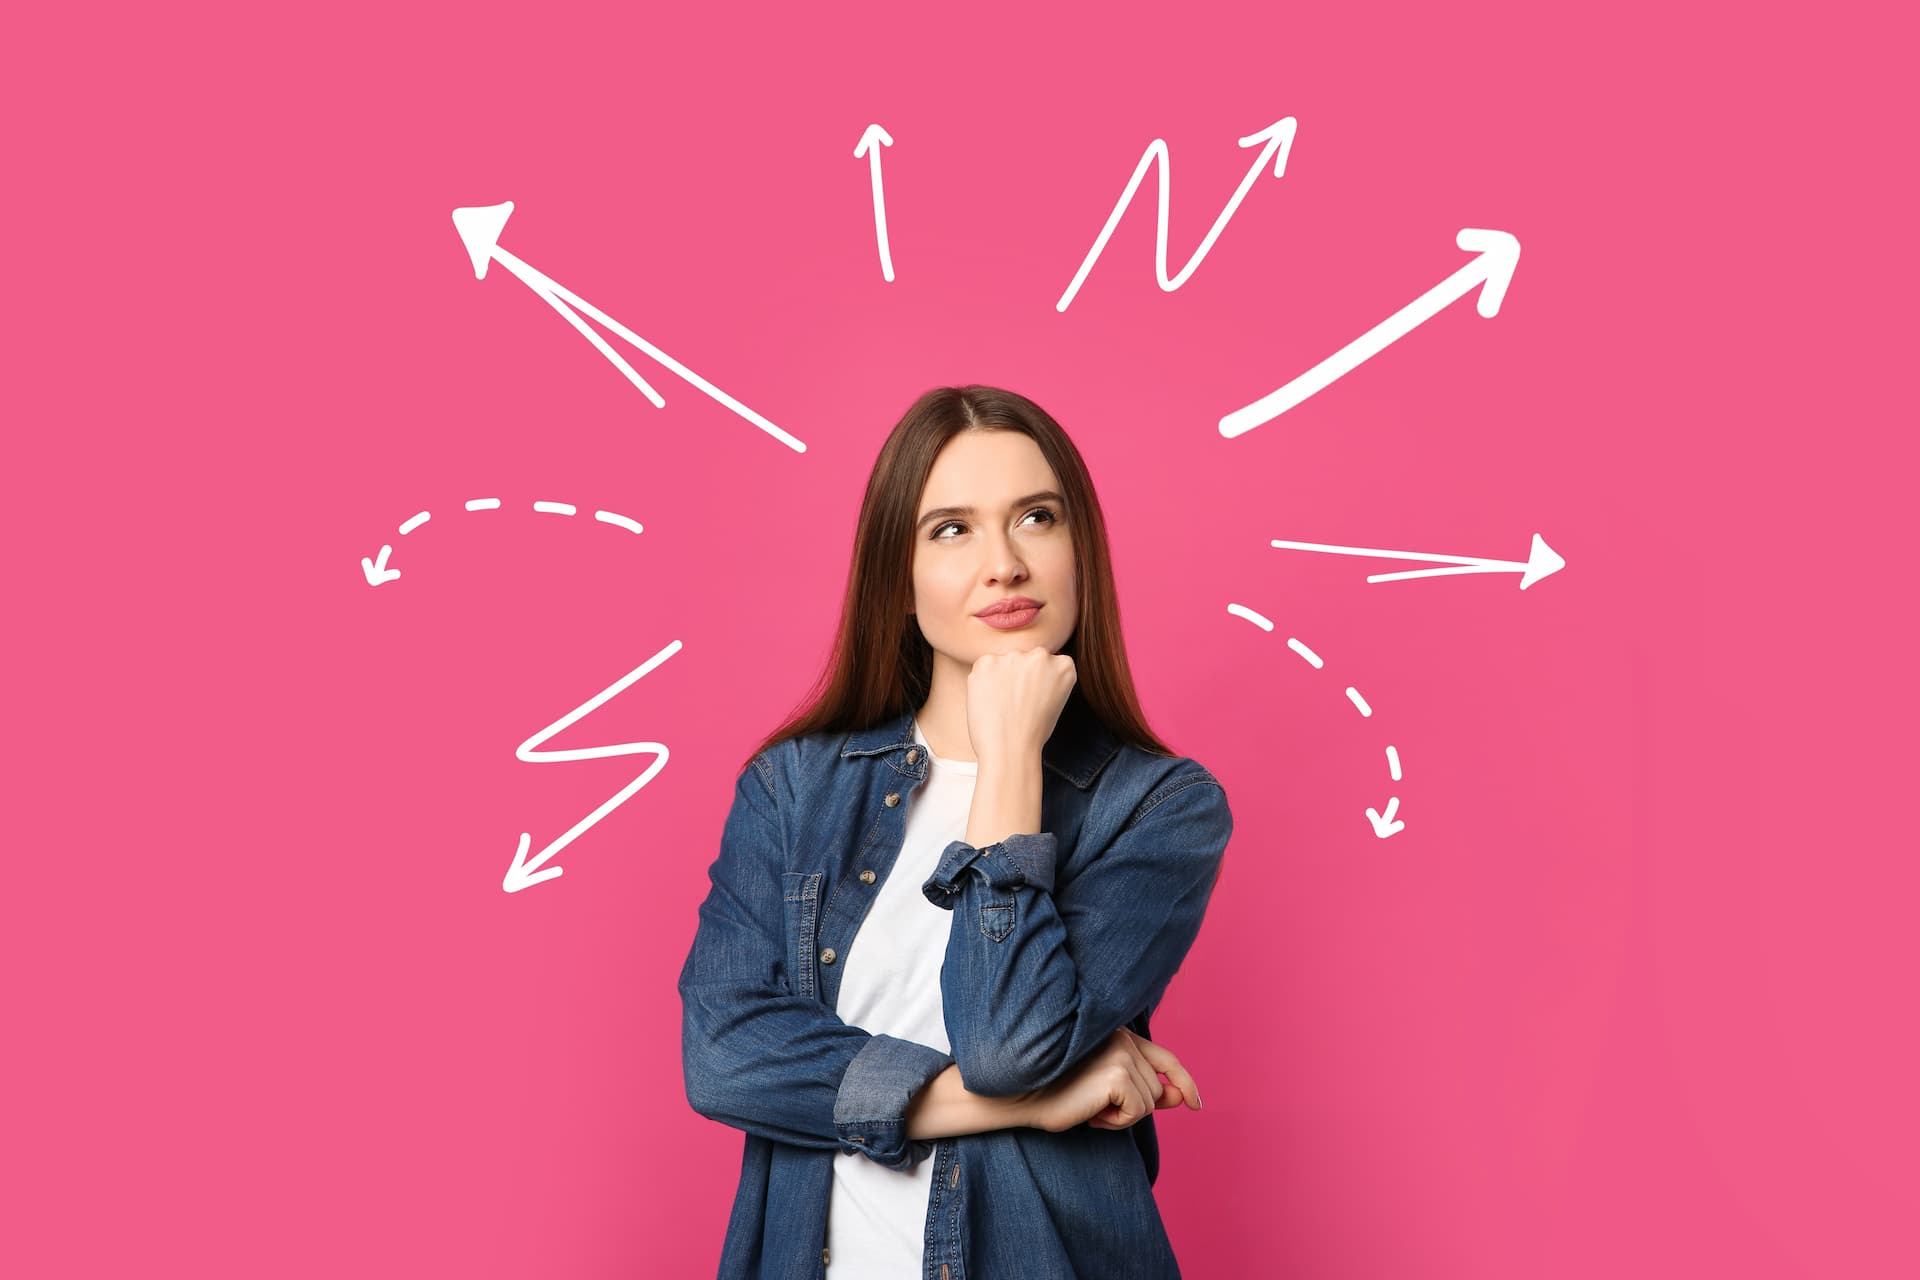 Young woman on pink background amidst arrows pointing in different directions, signaling a decision to make.